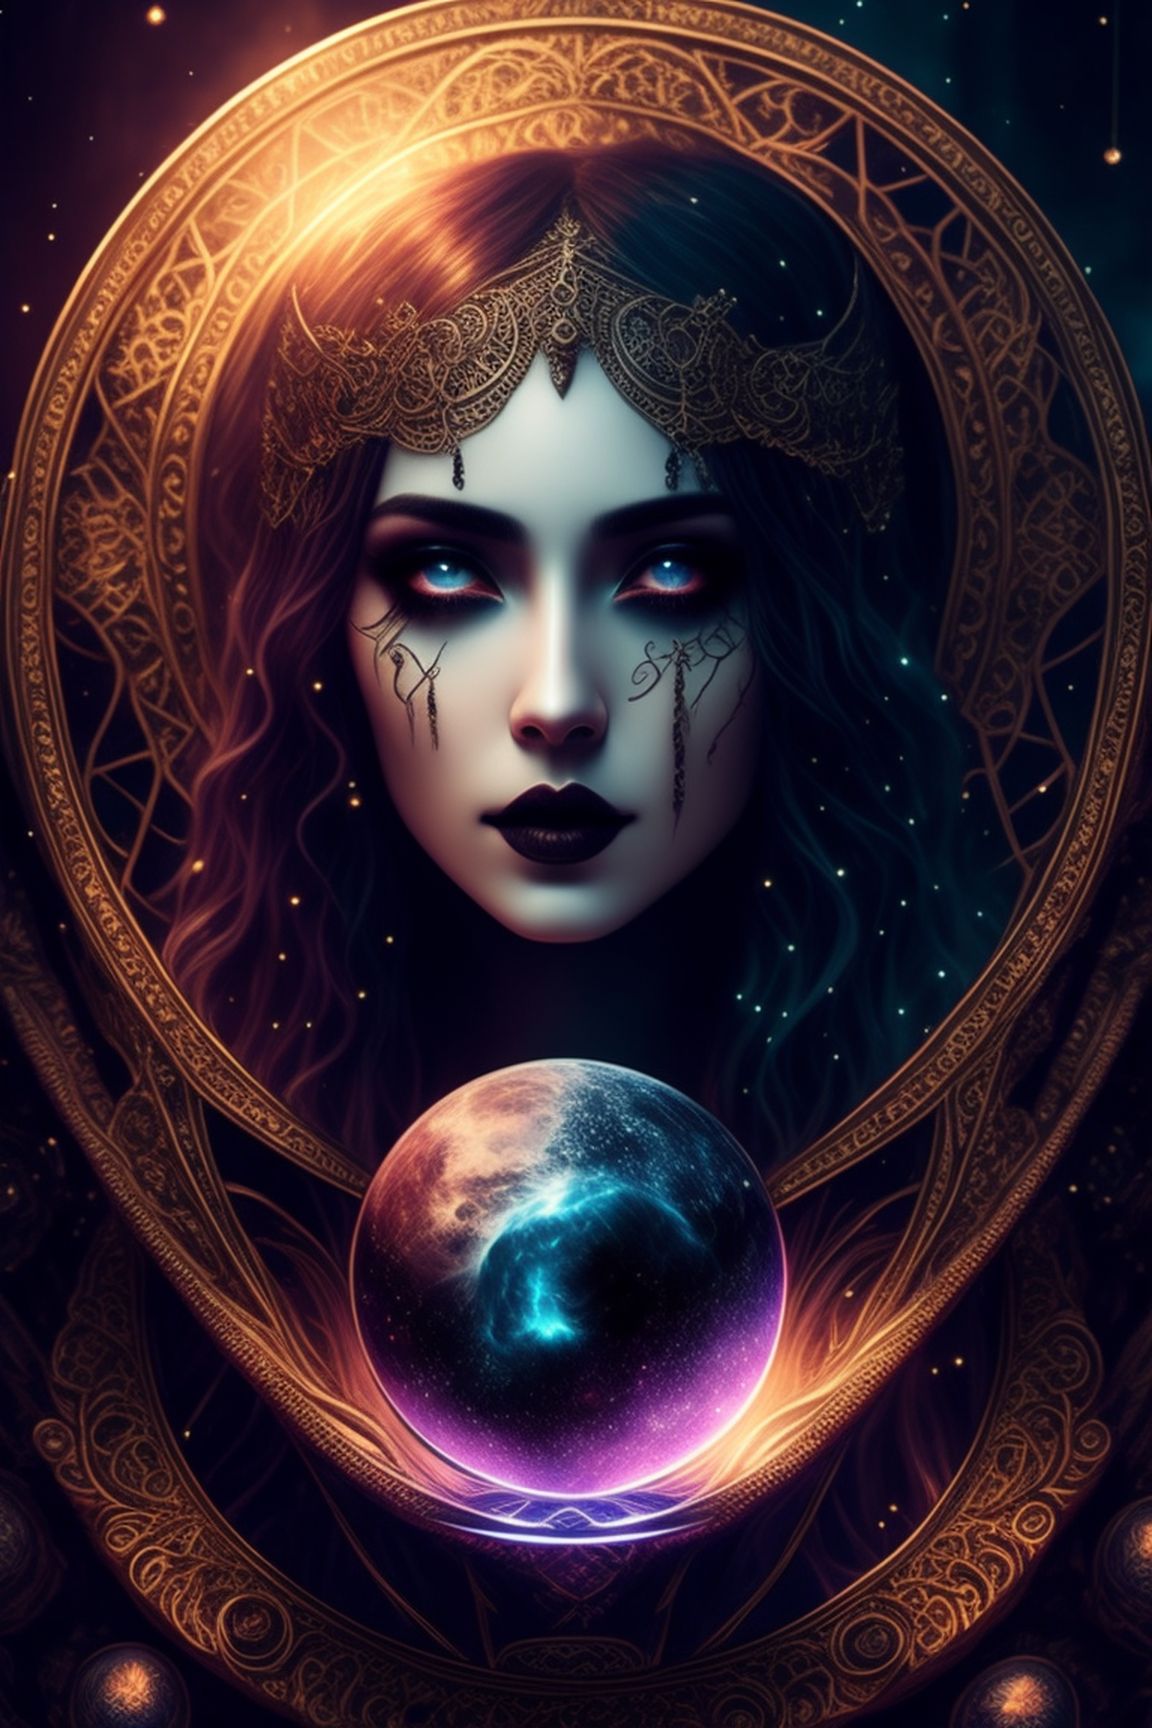 Centered, Photography, Realistic, ornate, intricate details, beautiful moon goddess, magic crystal ball, gothic style, hyper-realistic fantasy art, digital illustration, full shot, black colorful, Cinematic, Beautiful, Ultra detailed, Dramatic Lighting